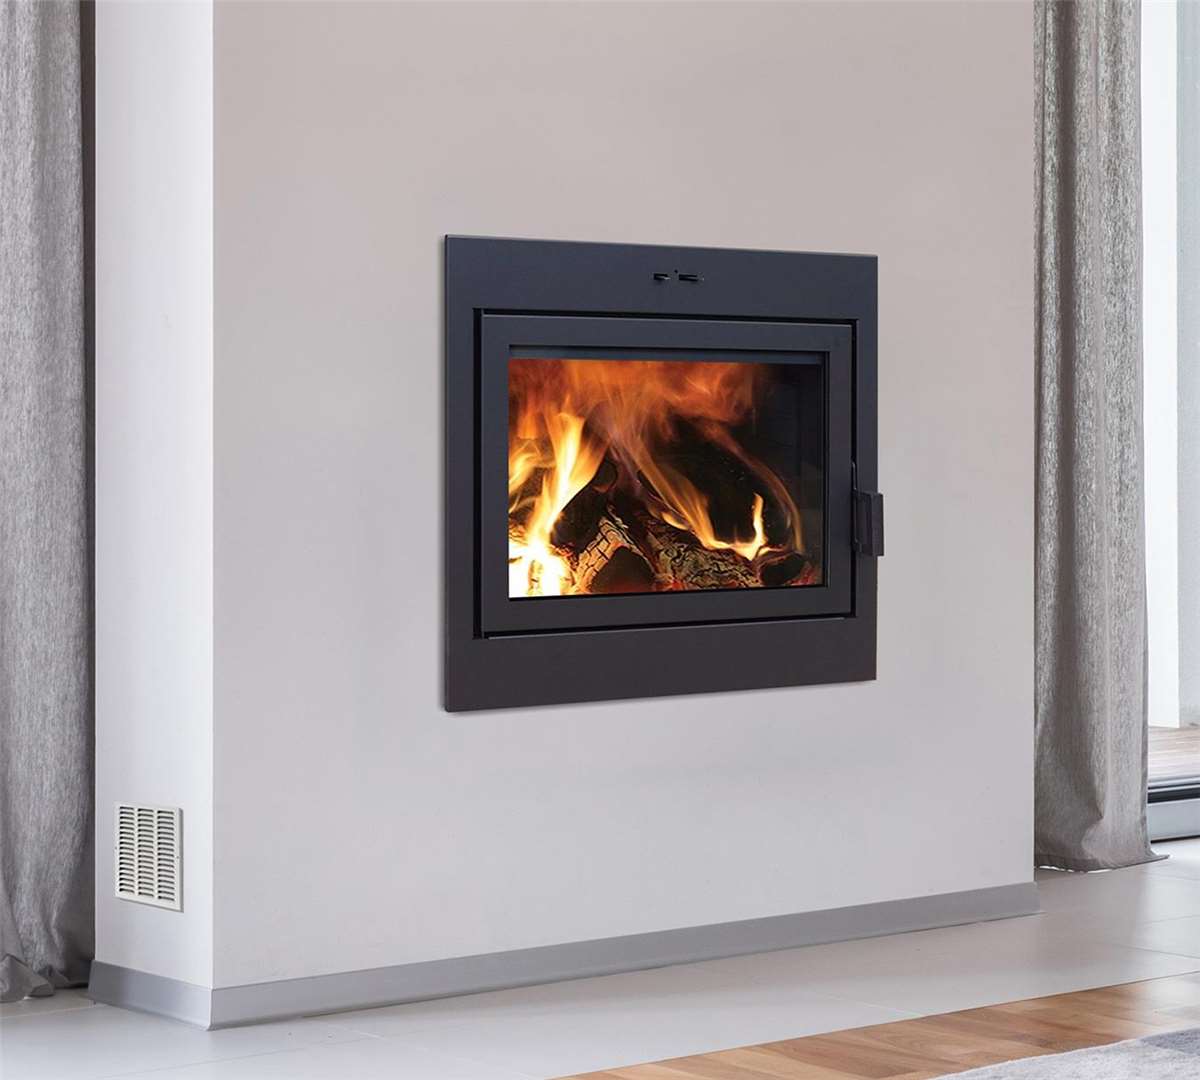 Supreme Astra 38 high efficiency woodburning fireplace.